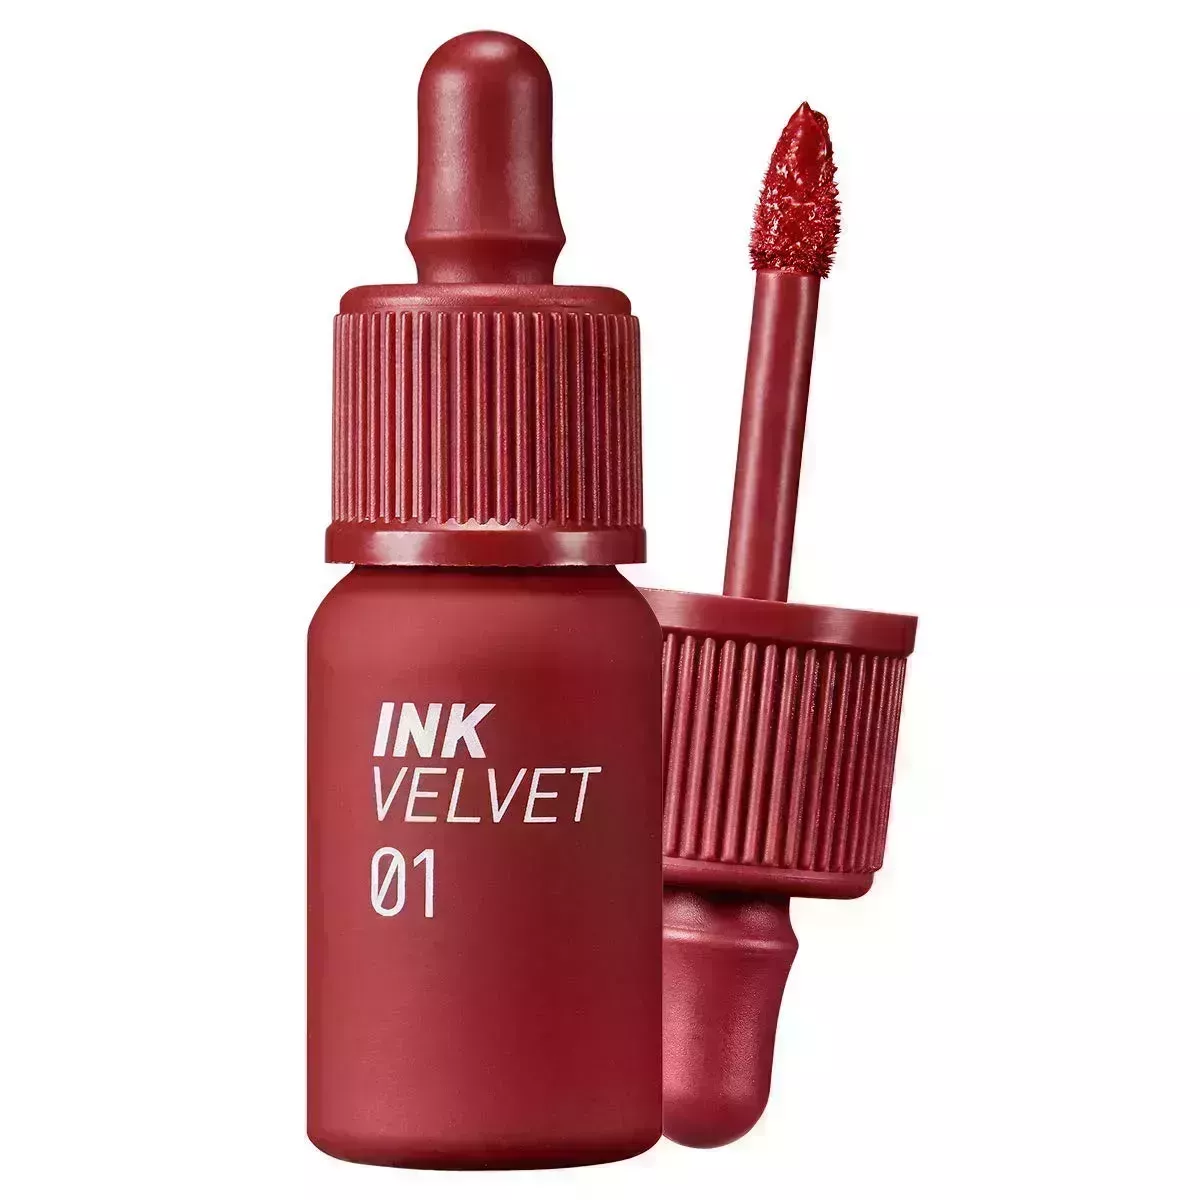 Peripera Ink the Velvet Lip Tint in shade 01 on white background